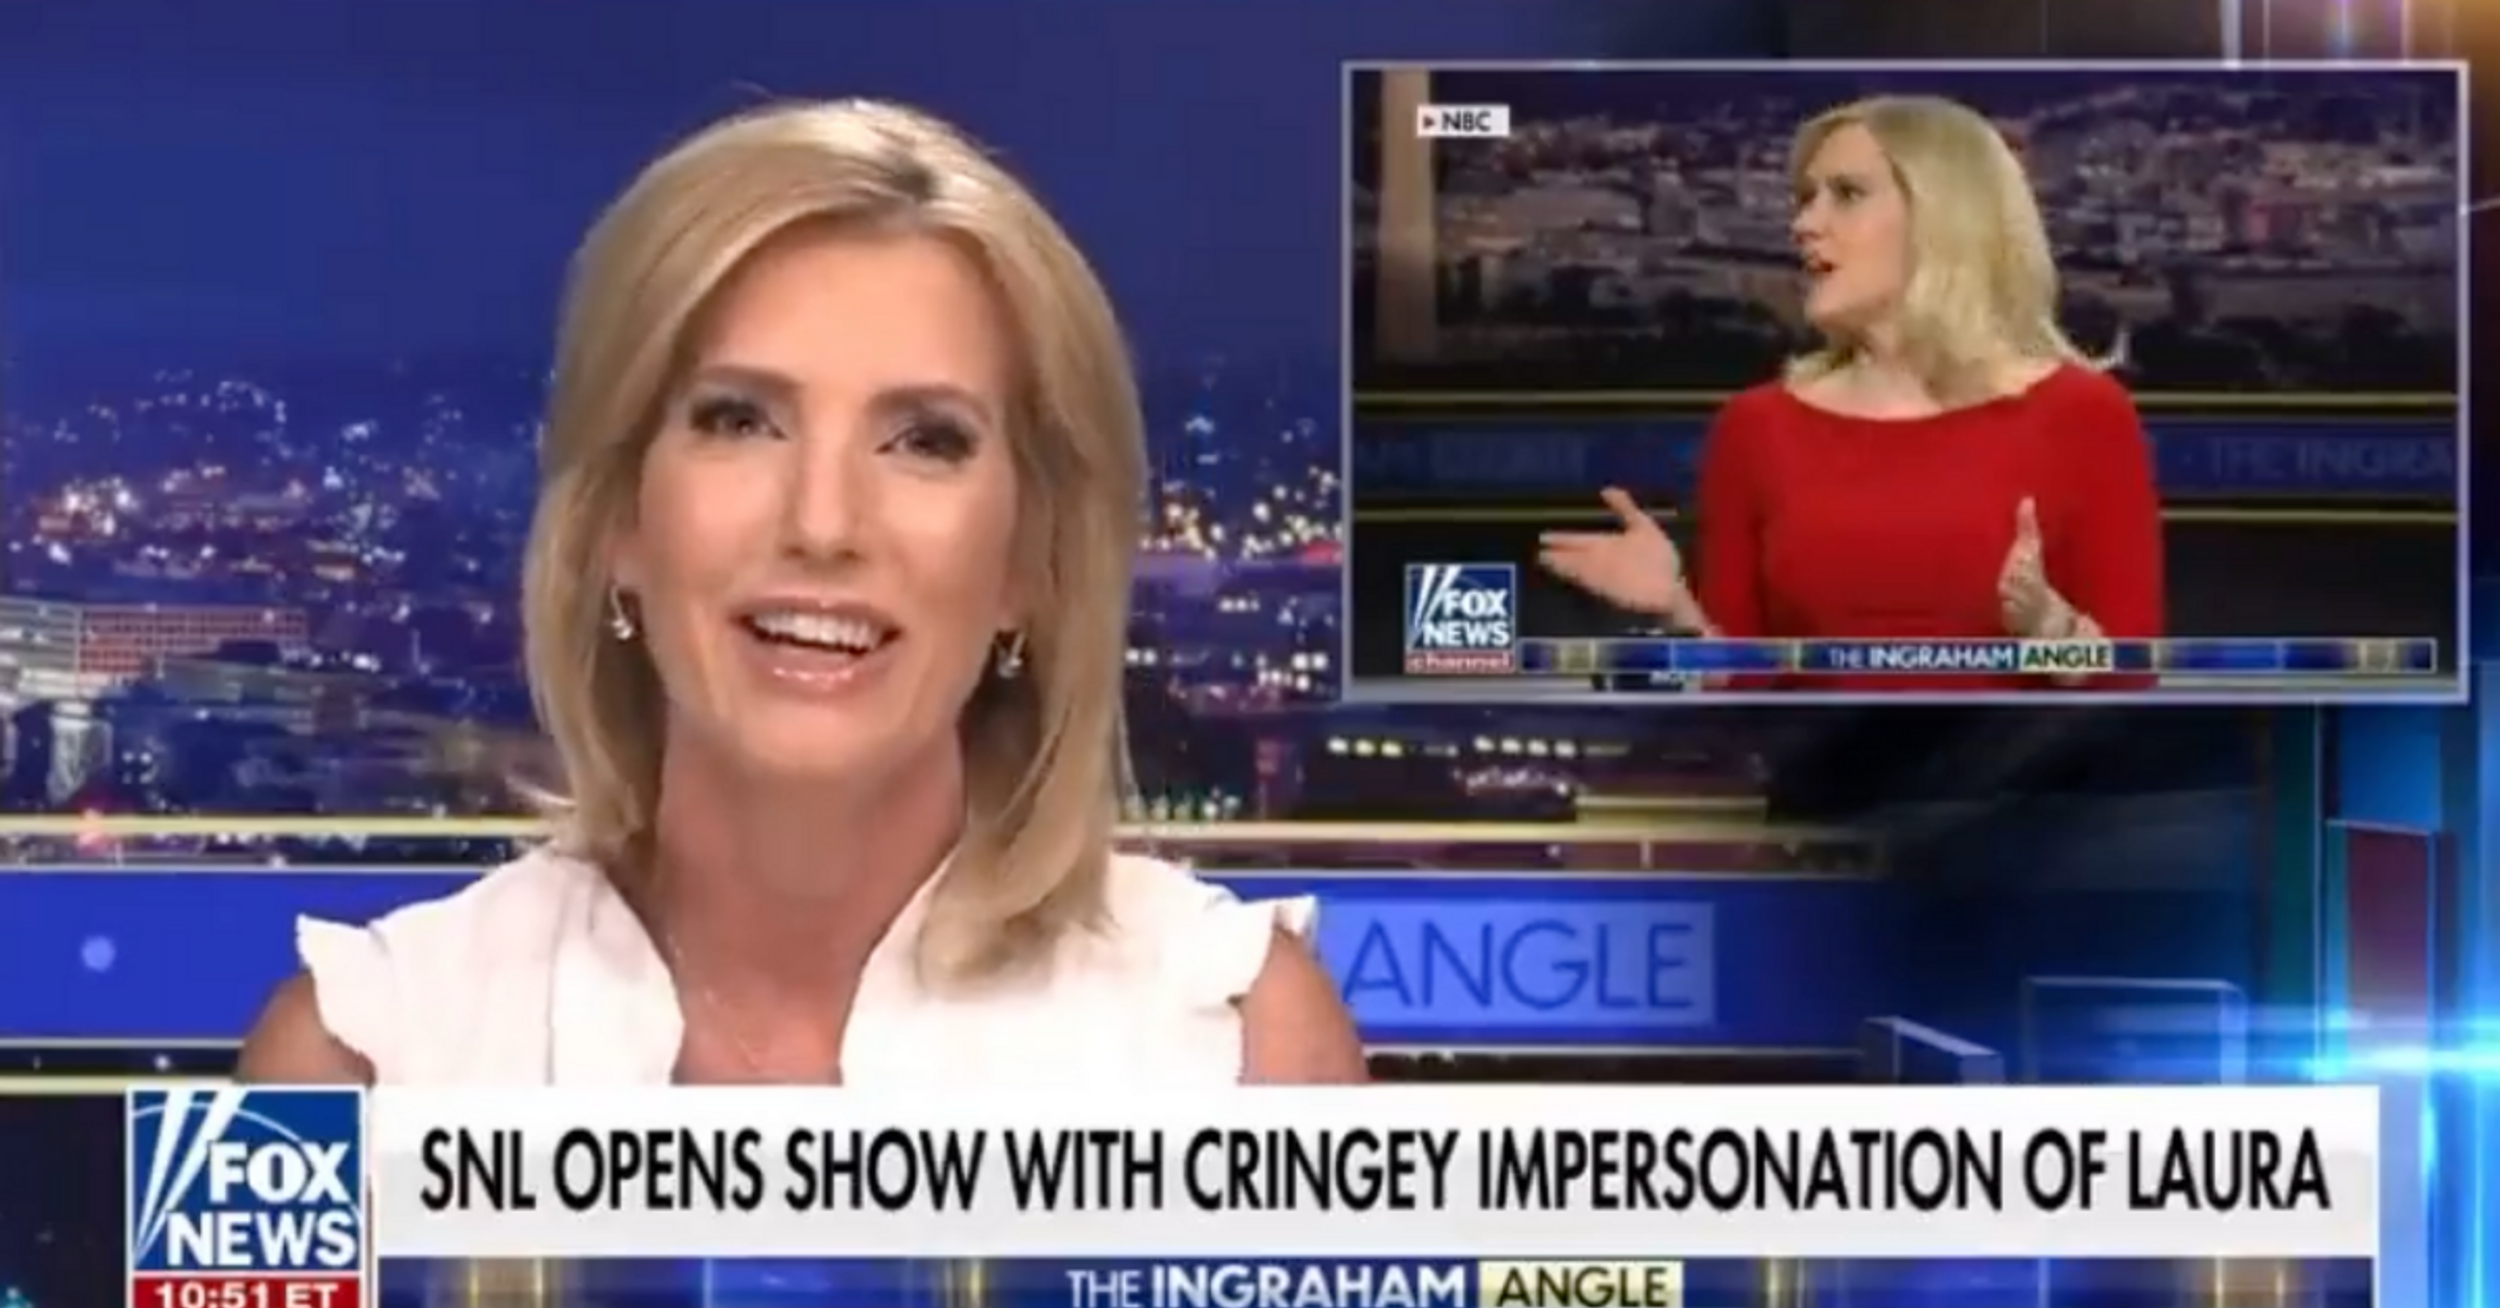 Laura Ingraham Tried To Mock Kate McKinnon's 'SNL' Impression Of Her—And It's A Cringe-Fest